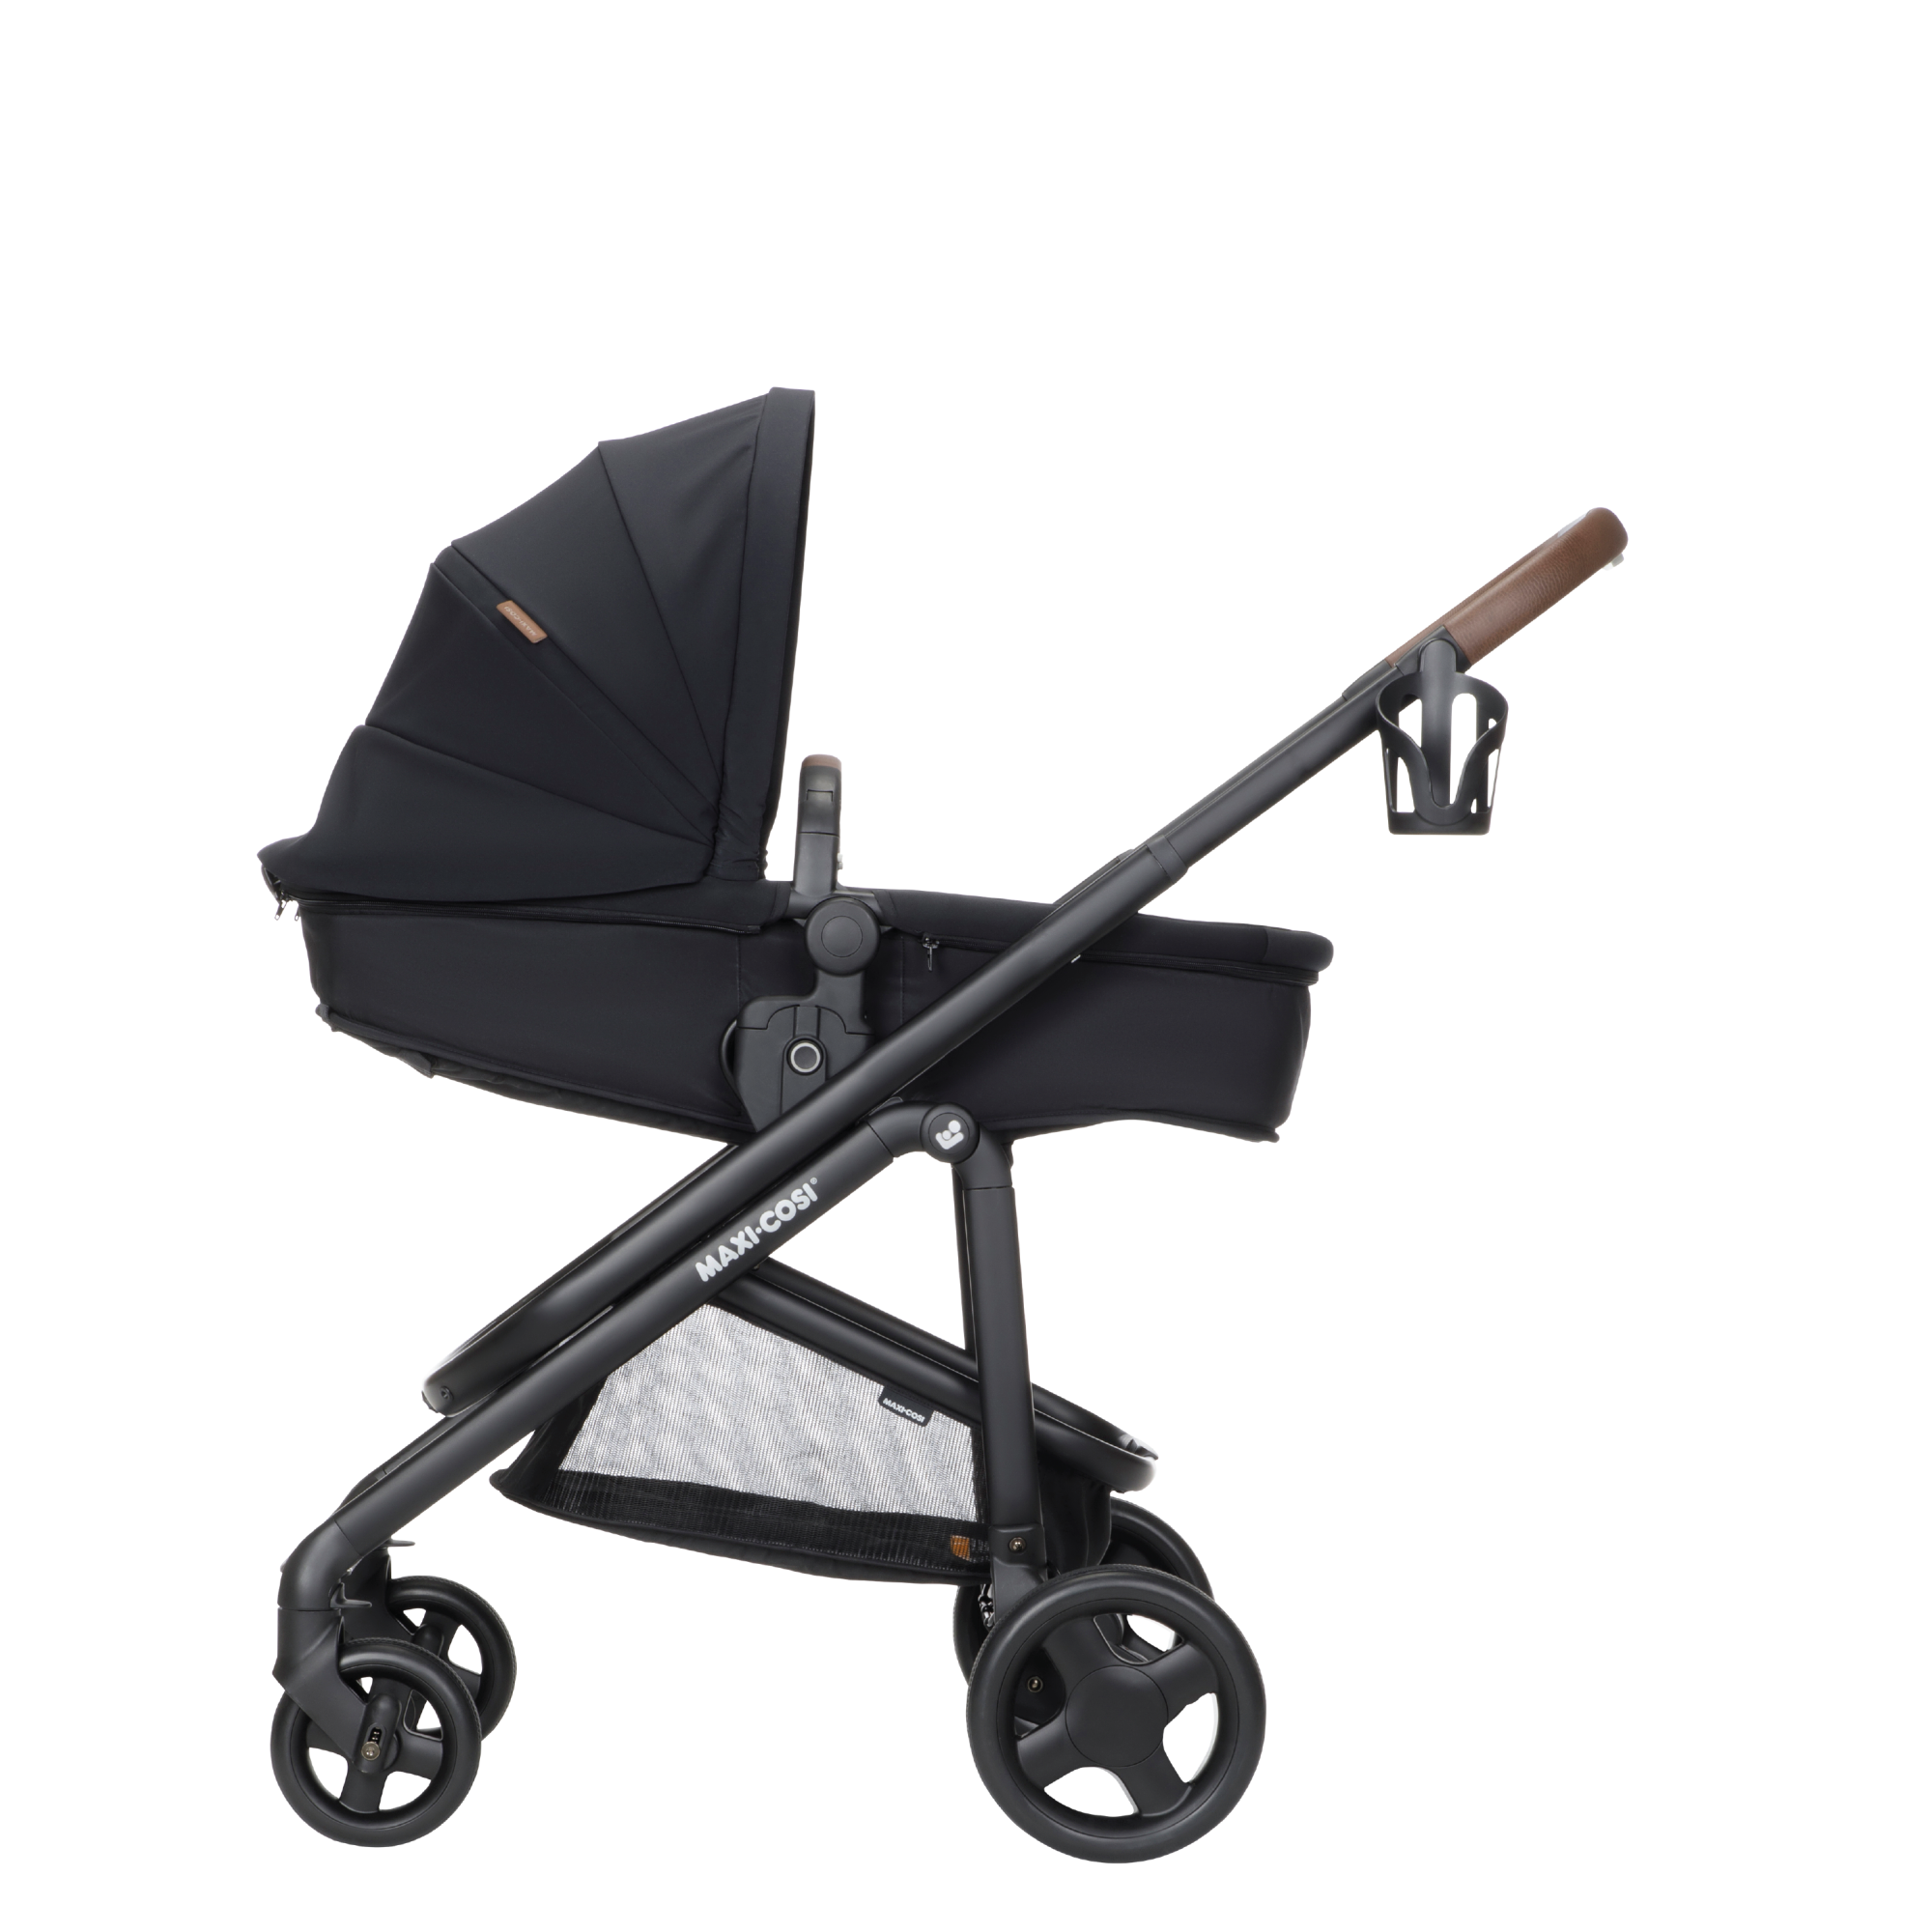 Tayla Max Modular Stroller - Onyx Wonder - QuikCarriage allows seat to convert to a lie-flat carriage instantly